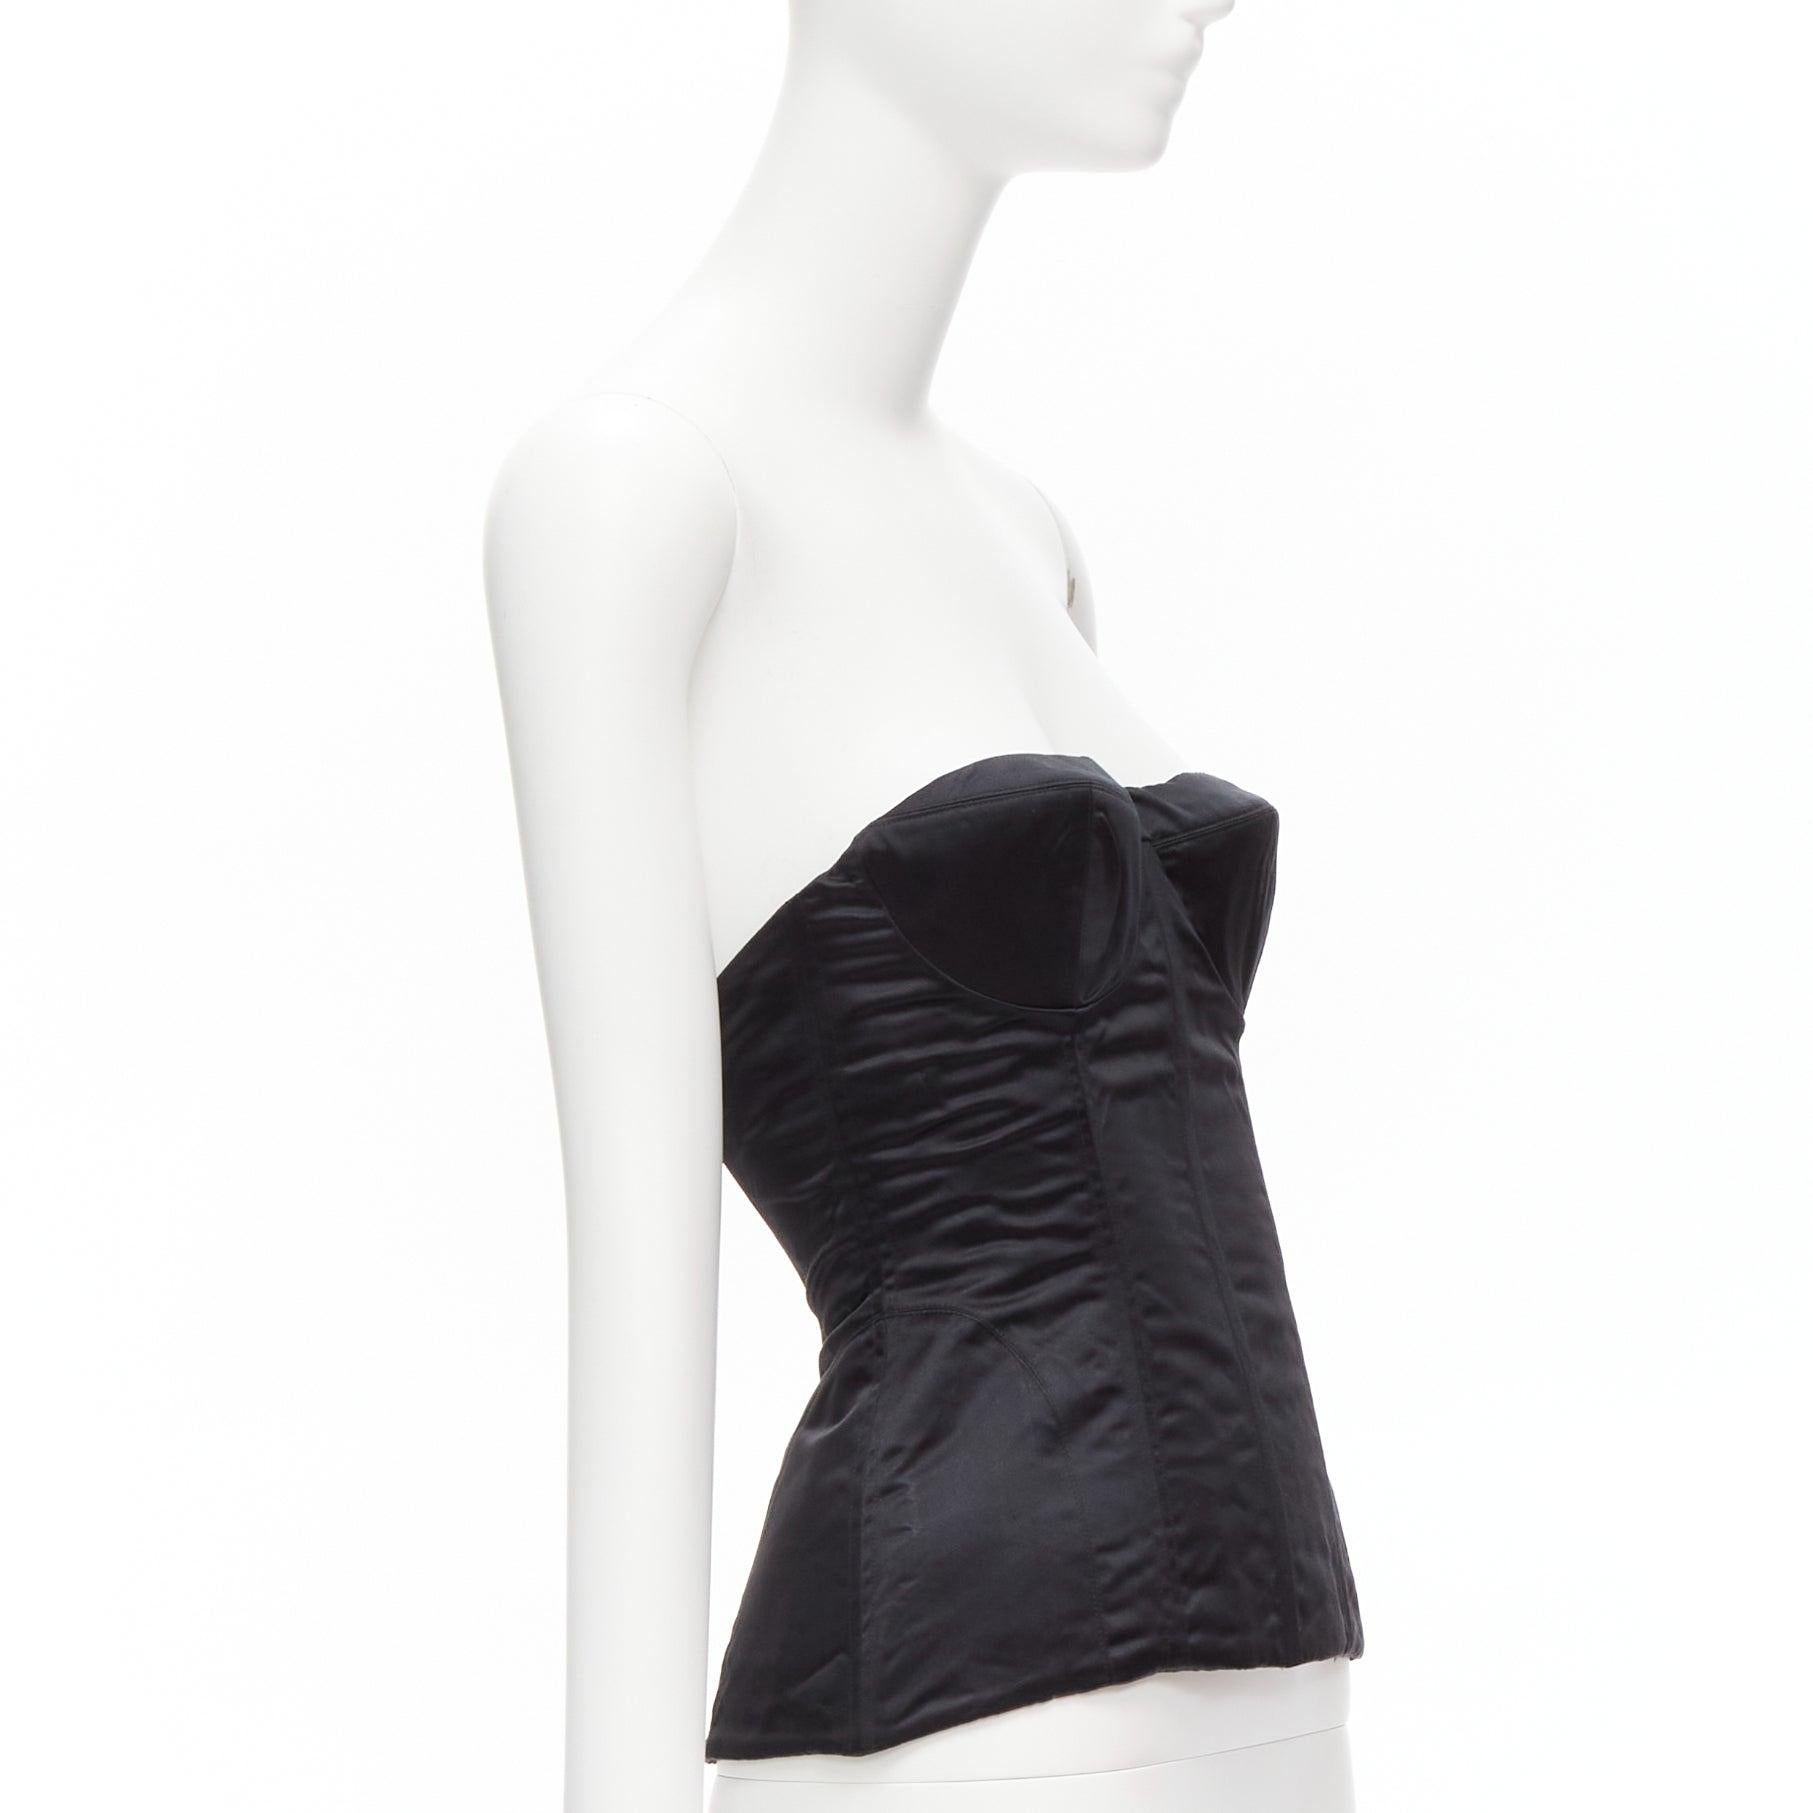 new GUCCI Tom Ford 2001 Runway black silk 3D conical bra bustier IT38 XS
Reference: TGAS/D00575
Brand: Gucci
Designer: Tom Ford
Collection: SS 2001 - Runway
Material: Silk
Color: Black
Pattern: Solid
Closure: Zip
Lining: Black Fabric
Extra Details: